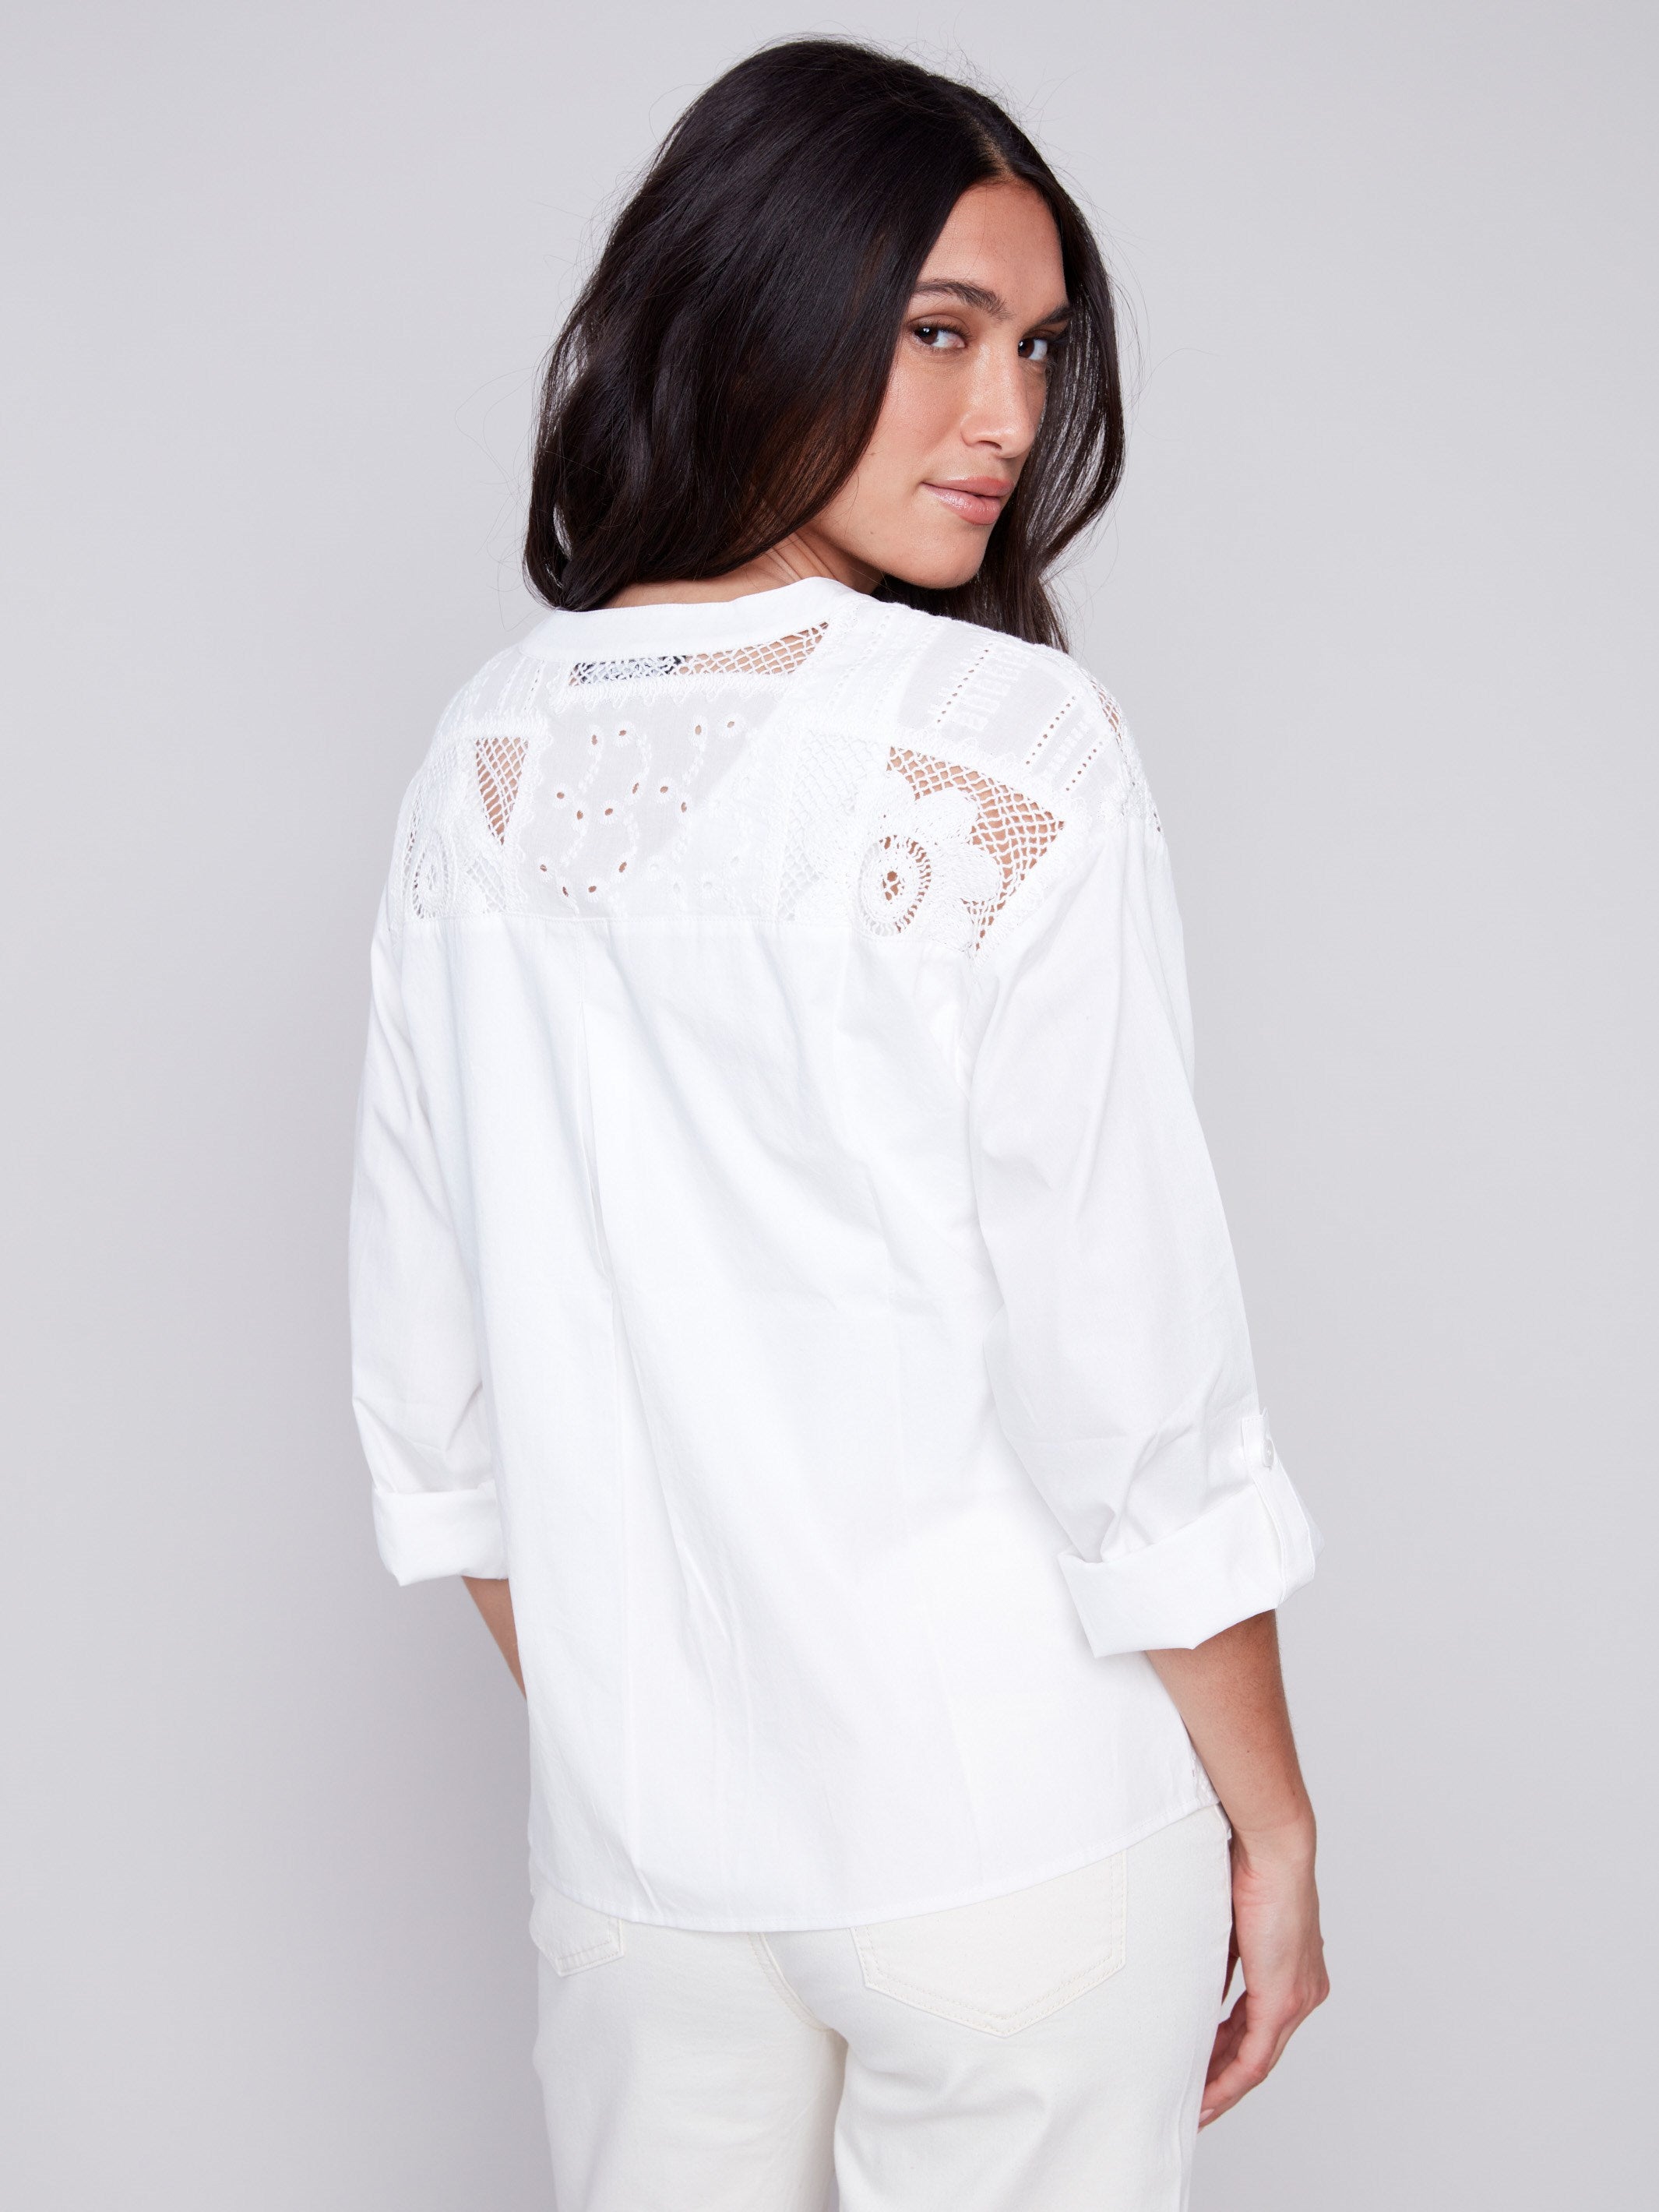 Cotton Eyelet Shirt - White - Charlie B Collection Canada - Image 2